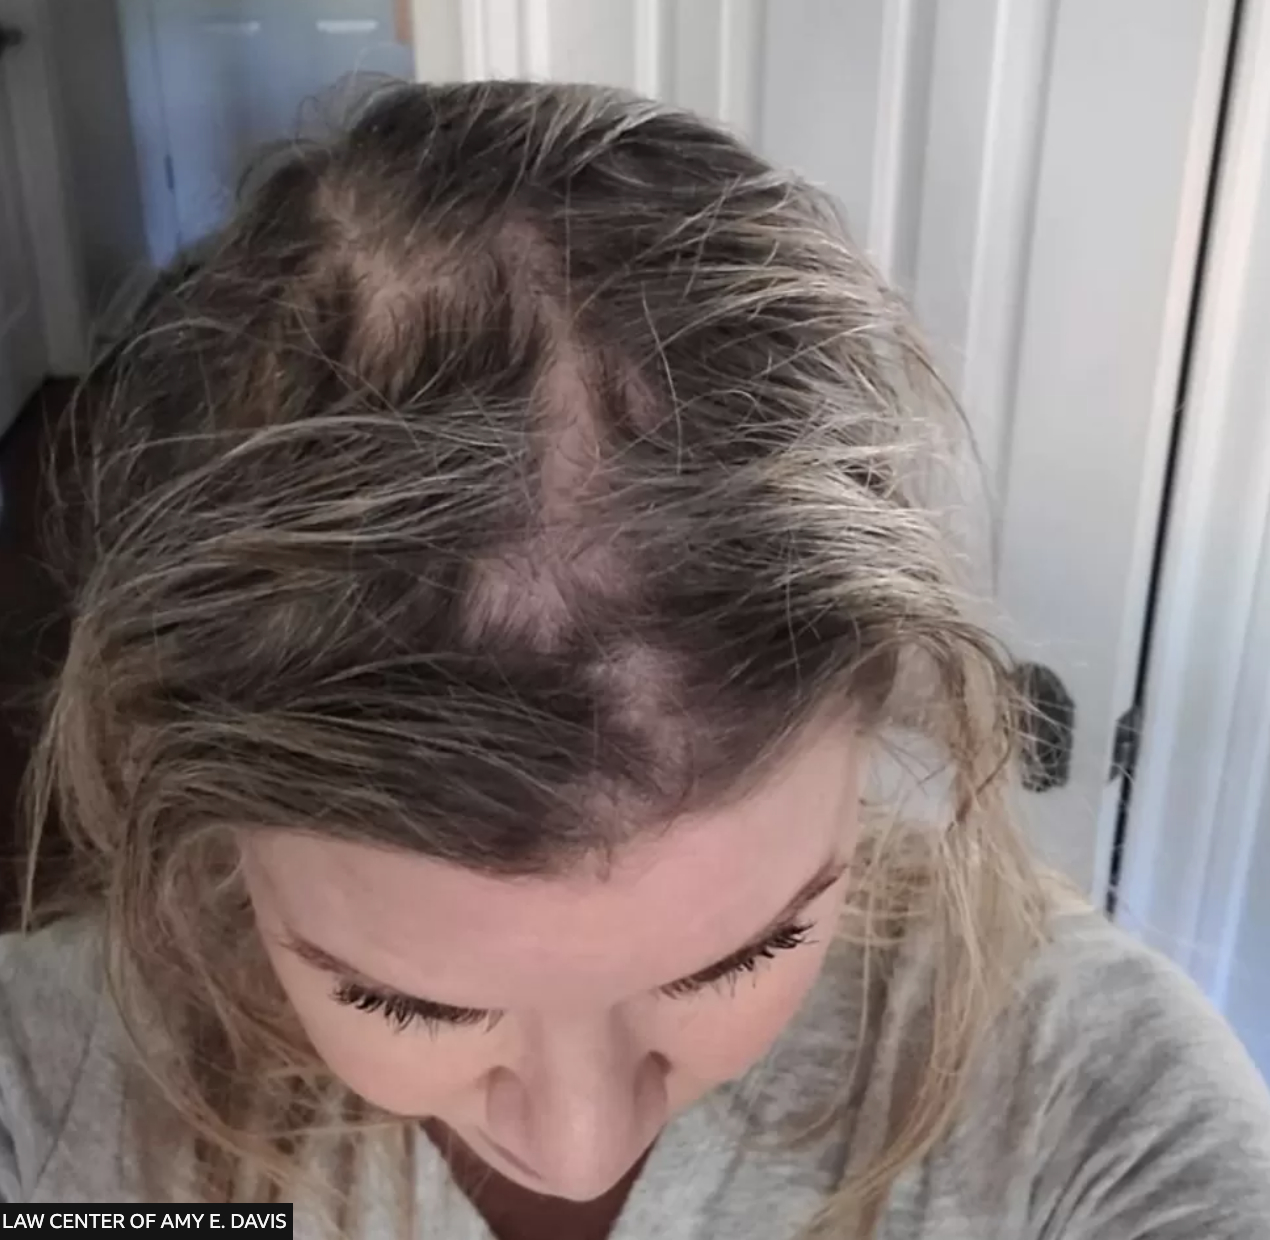 image from an individuals who claims to have suffered hair loss from Olaplex products